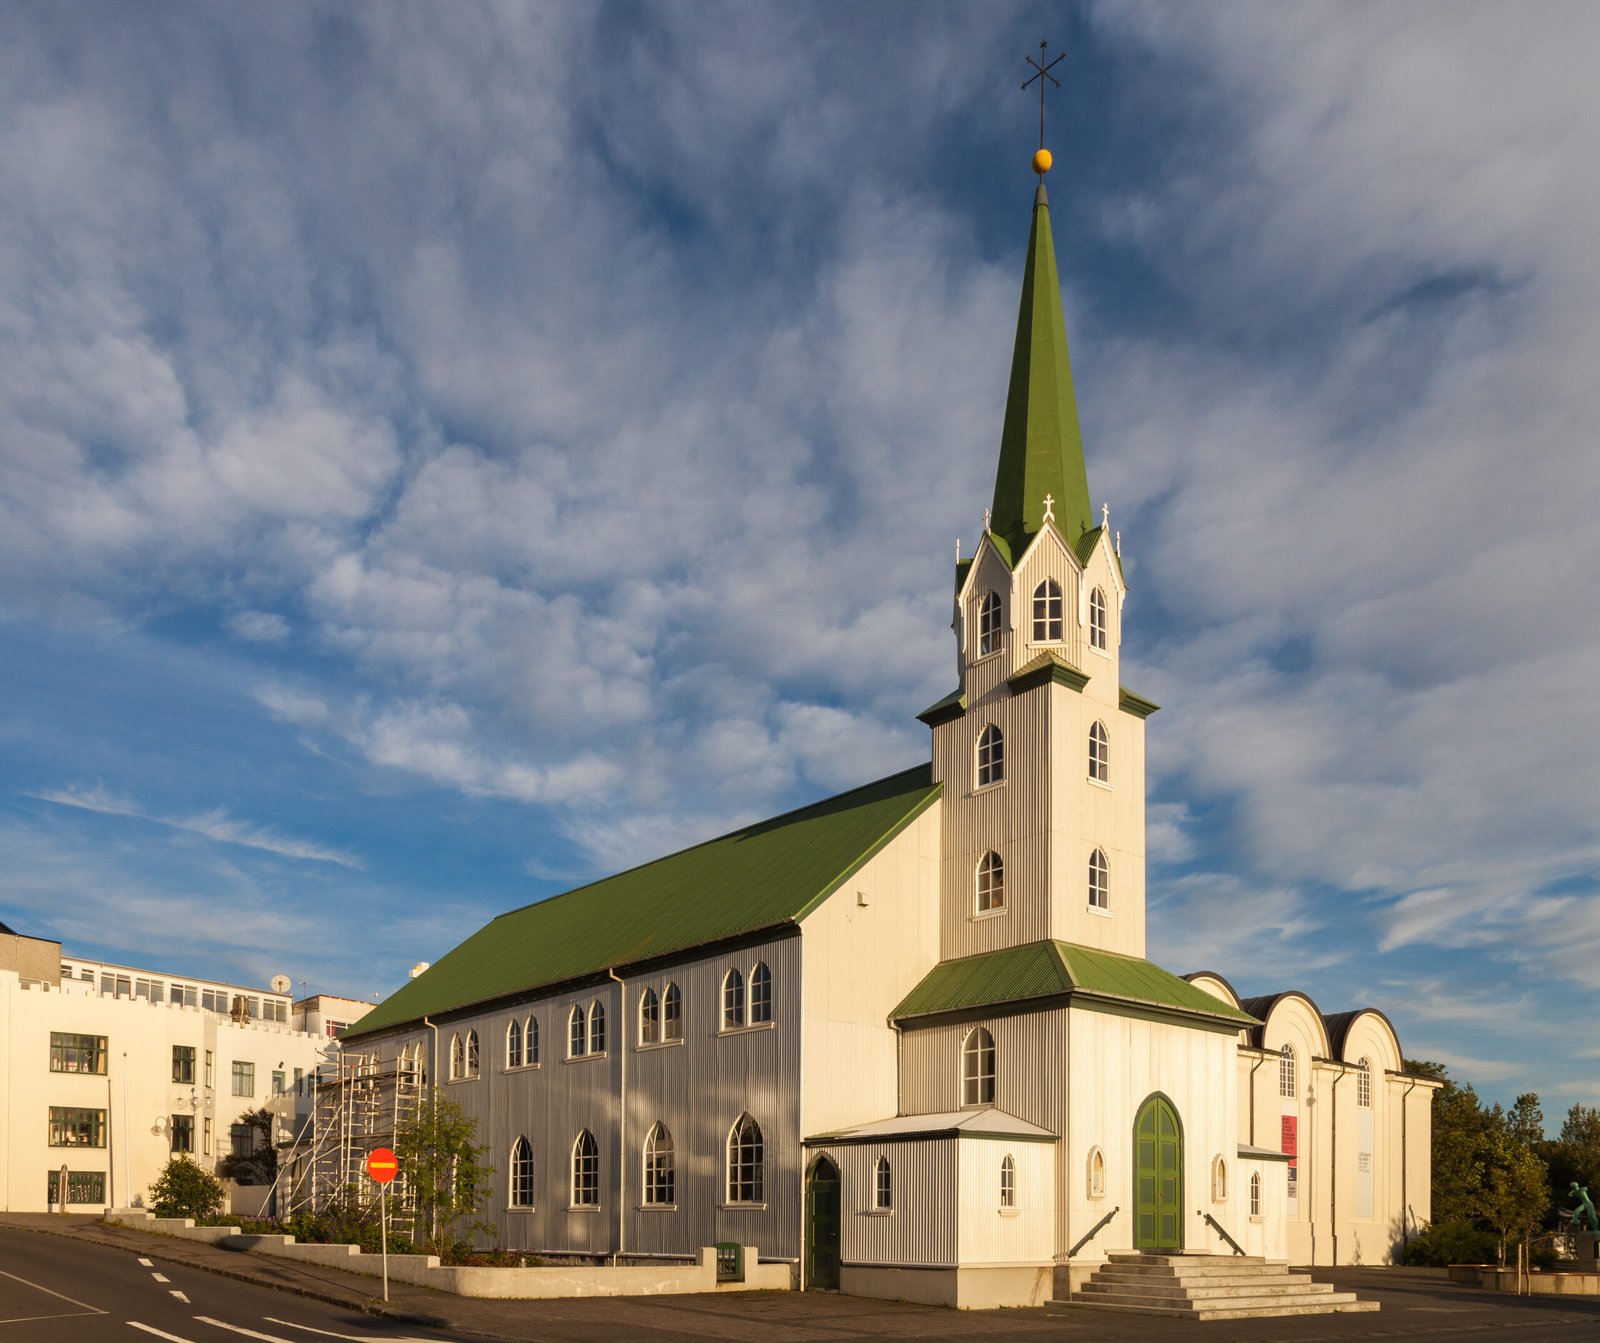 Queer-Friendly Spots in Reykjavik, Iceland: Northern Lights and Pride